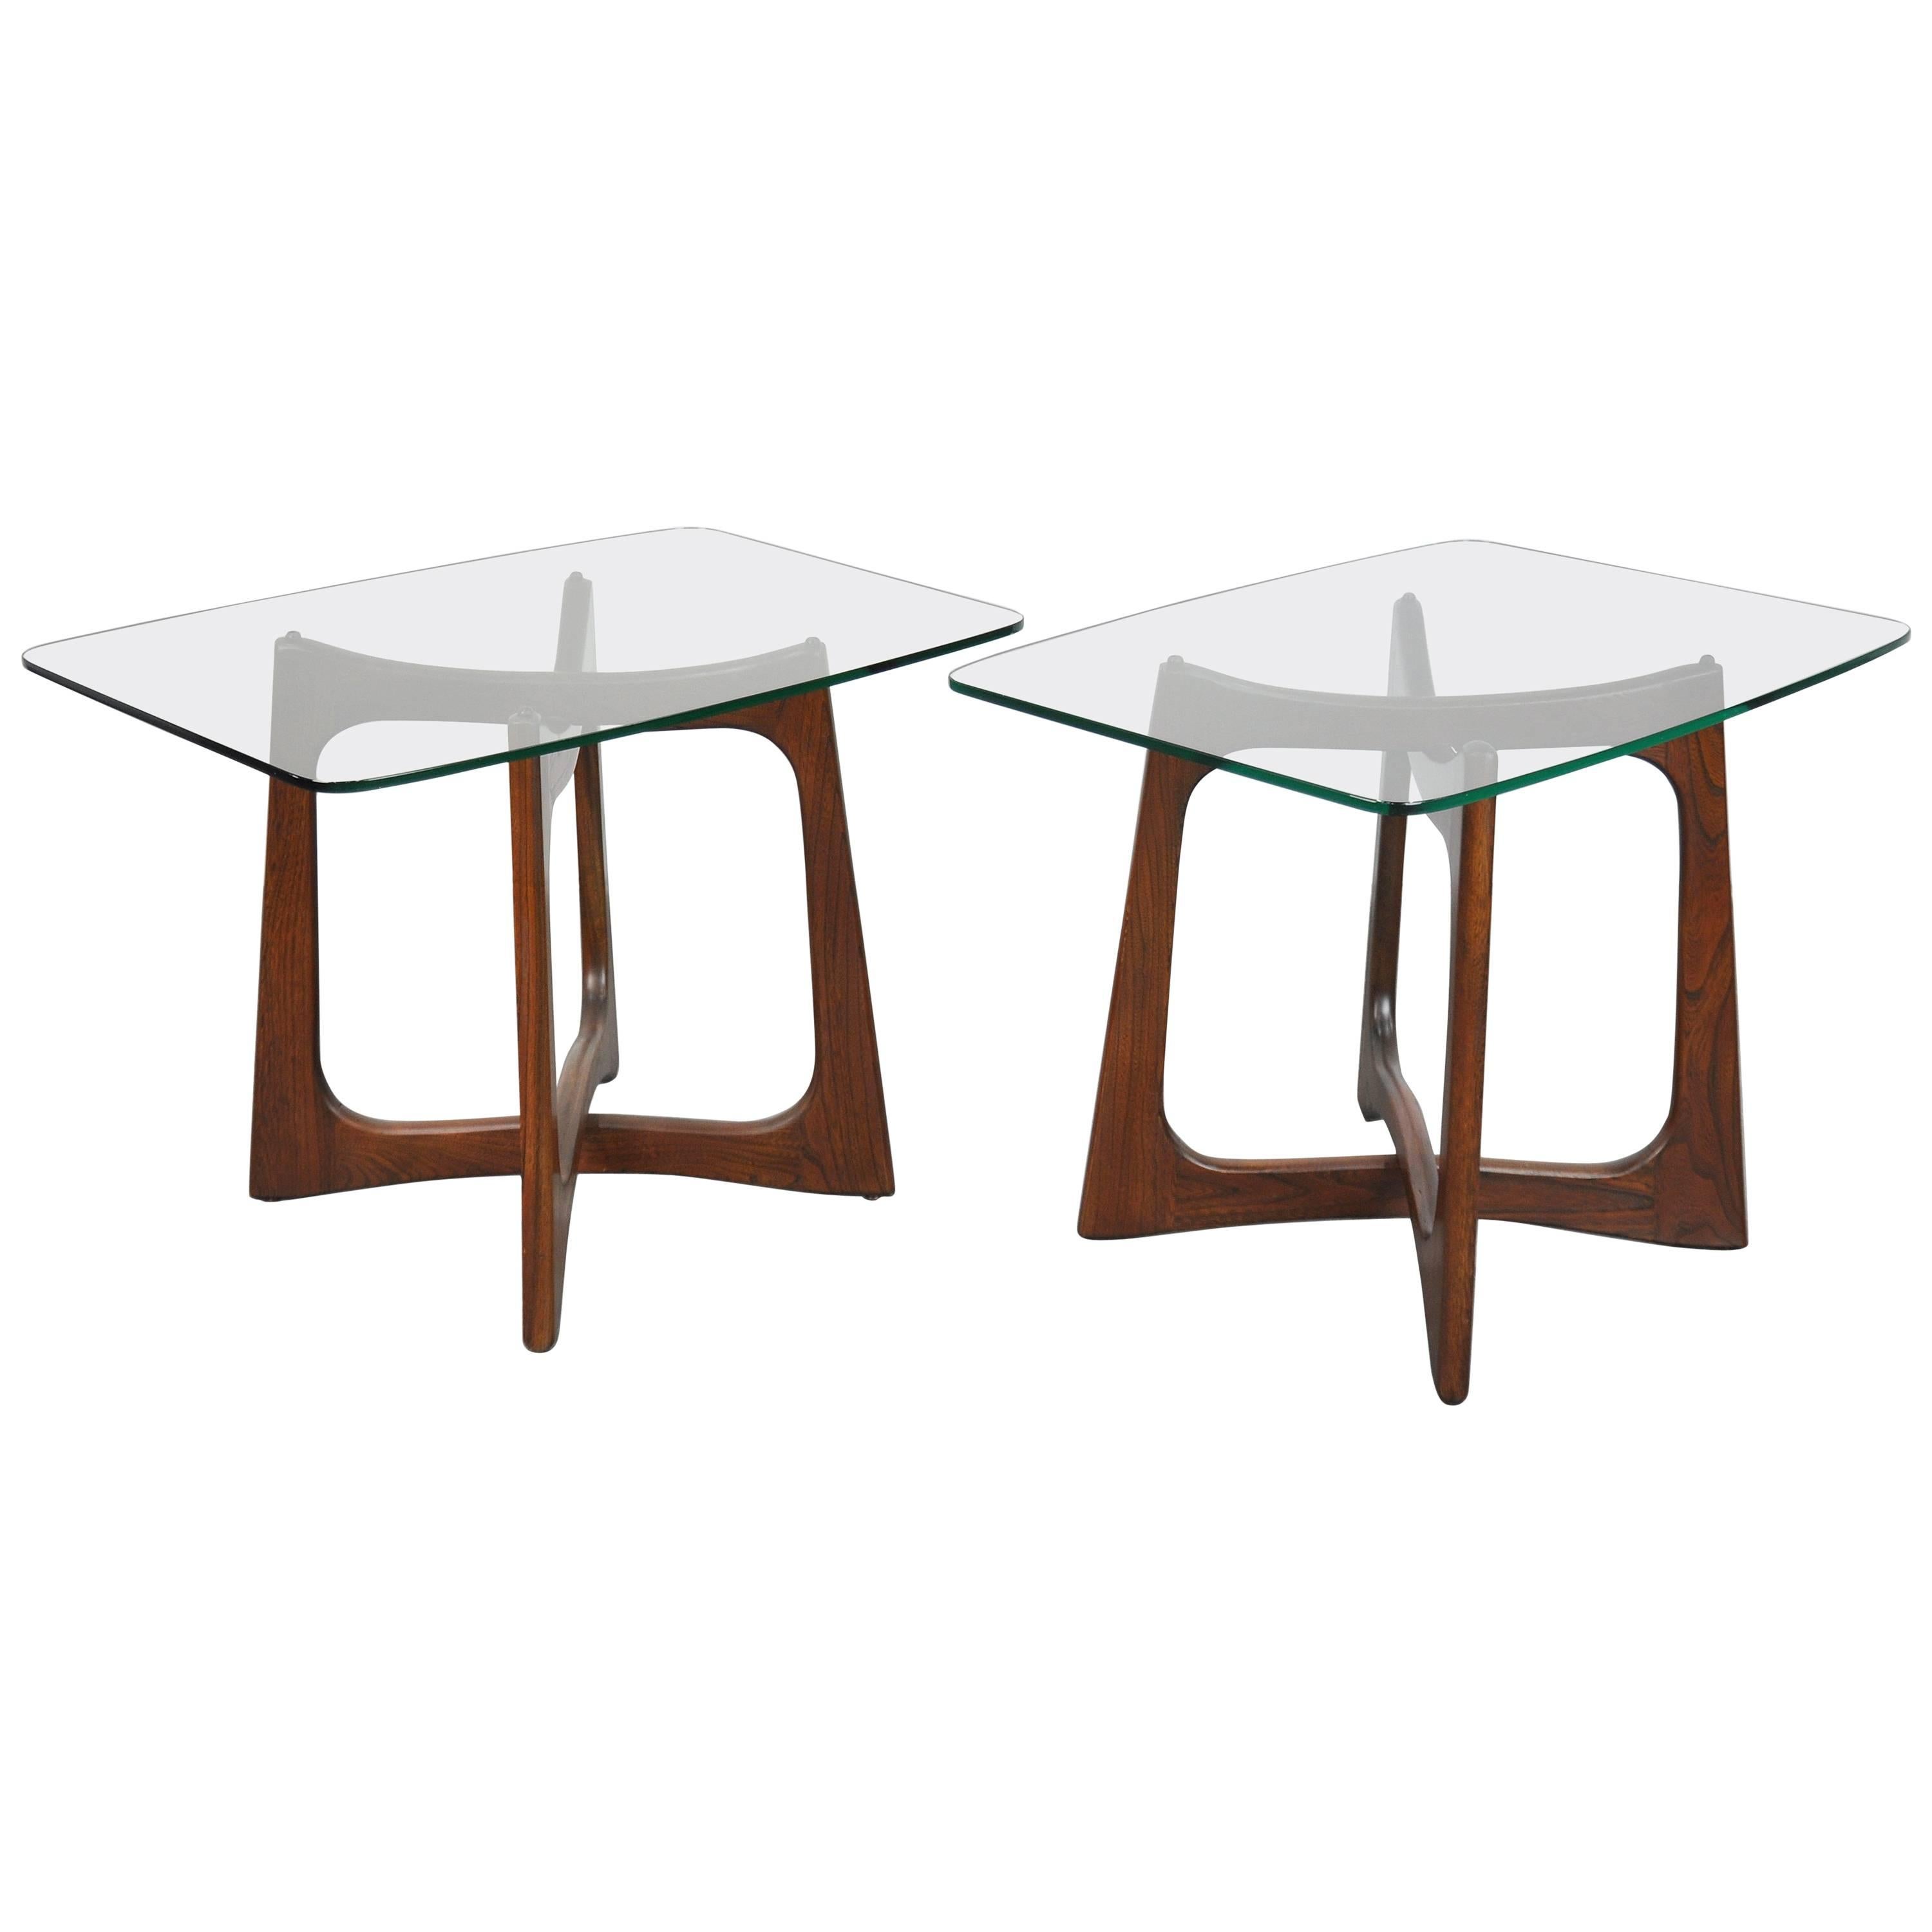 Pair of Adrian Pearsall for Craft Associates Walnut Side Tables